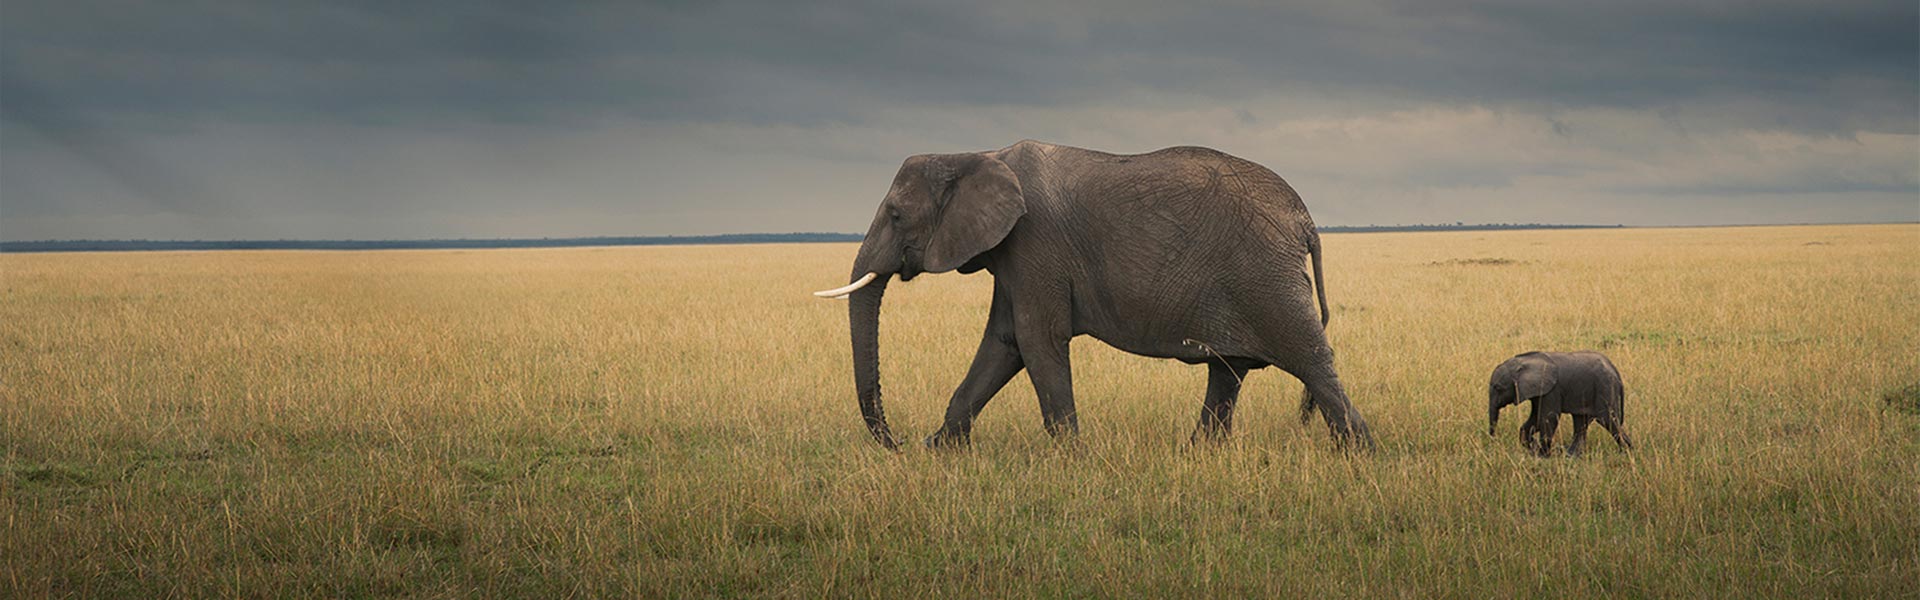 Protecting Elephants and Rhinos in the Wild with Drones, Data, and IoT